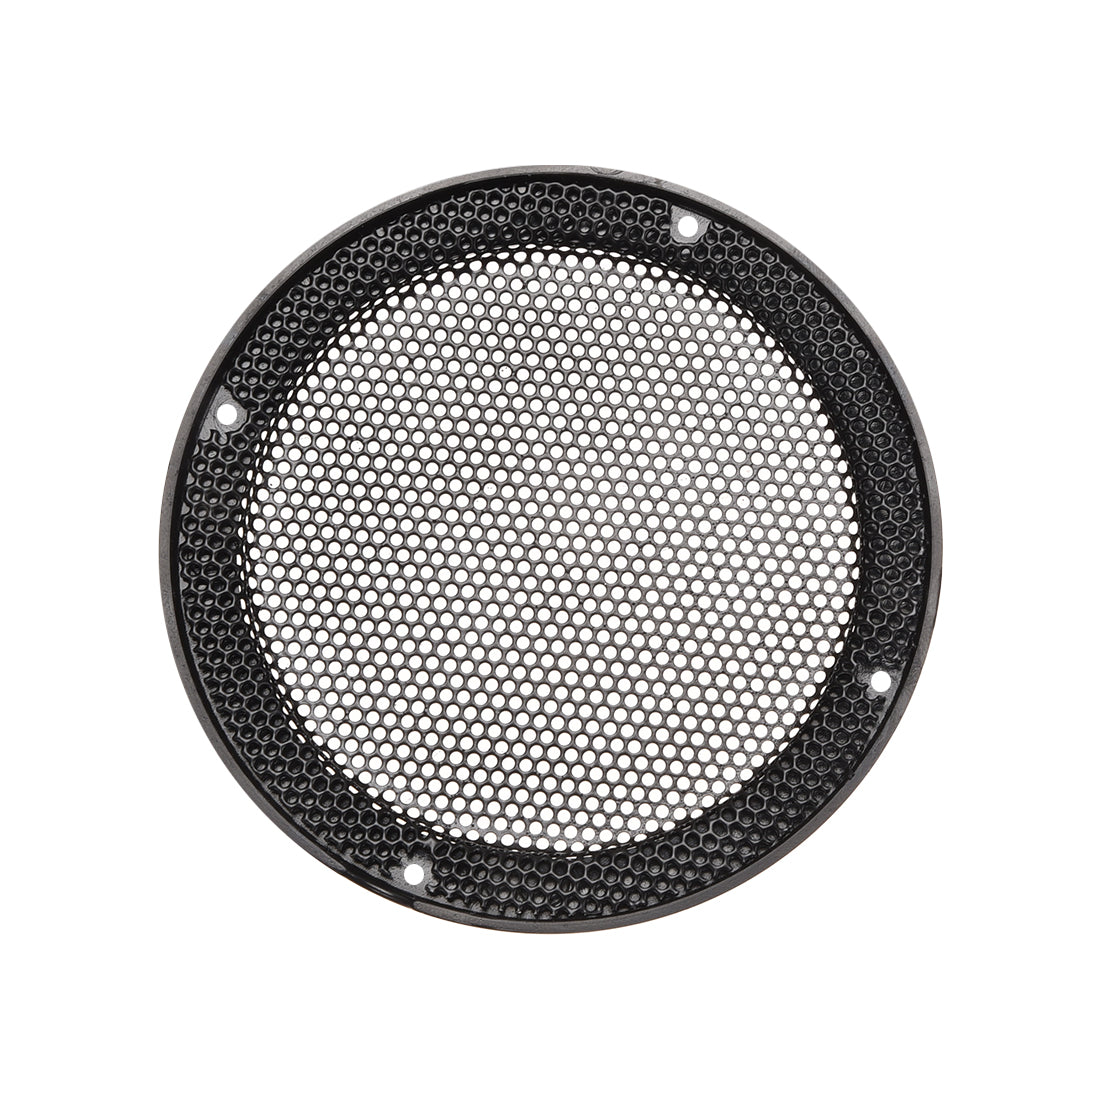 uxcell Uxcell Grill Cover 3 Inch 93mm Mesh Circle Subwoofer Guard Protector Black 2pcs